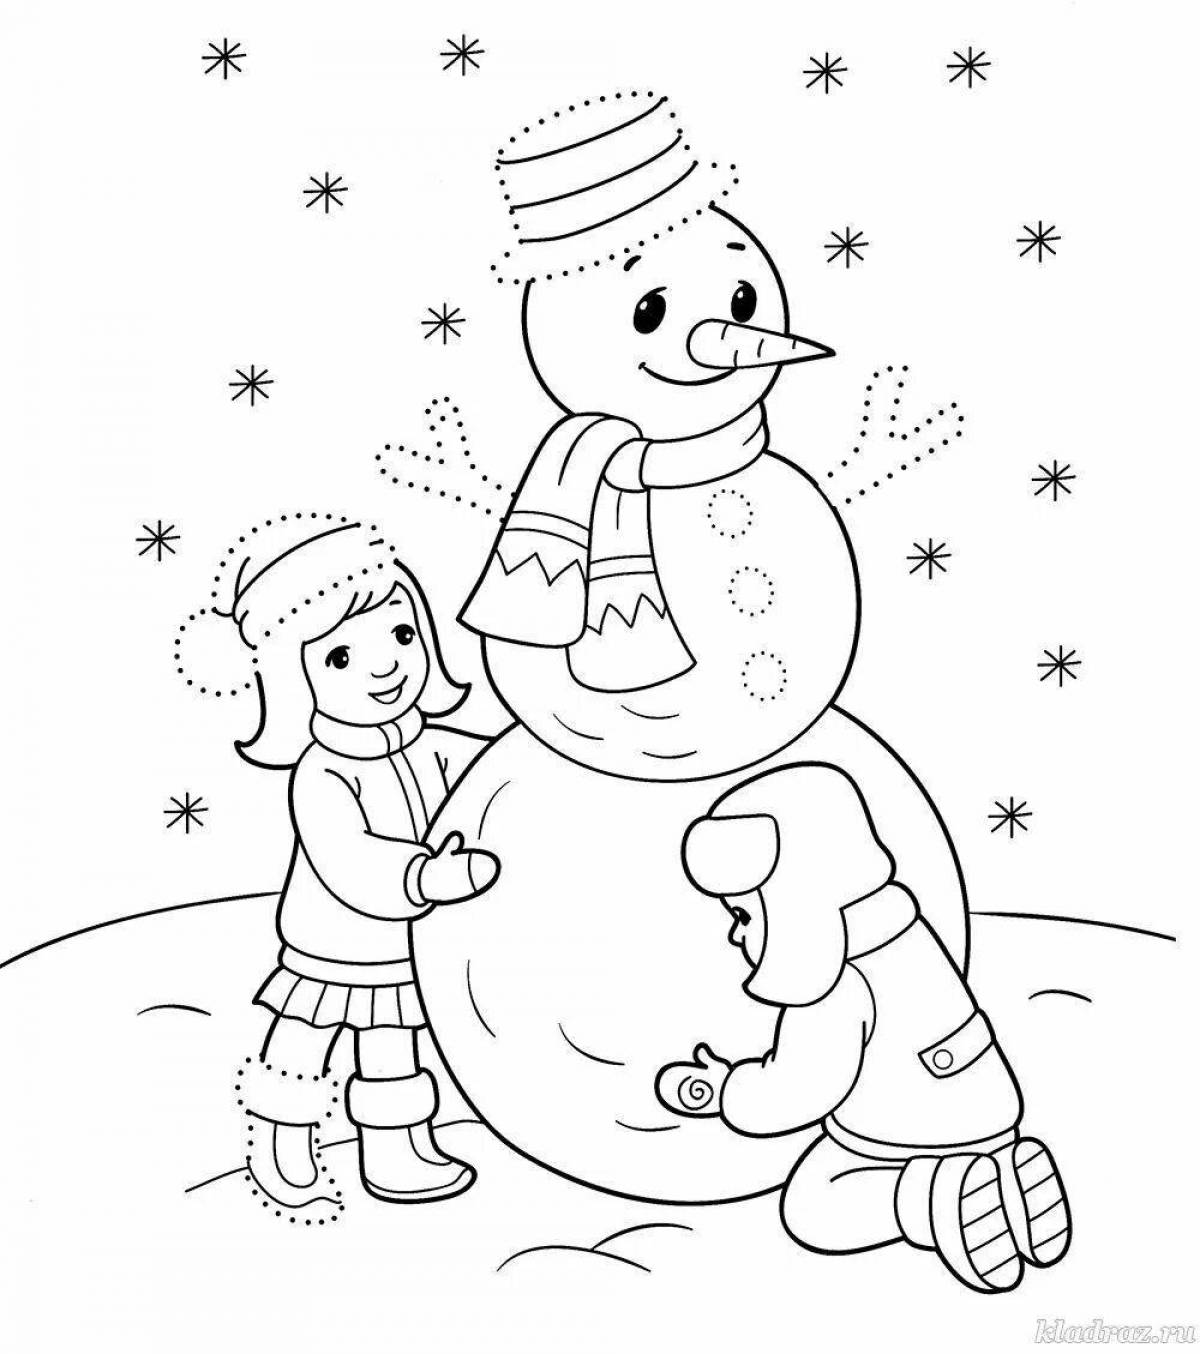 Lively junior group winter coloring